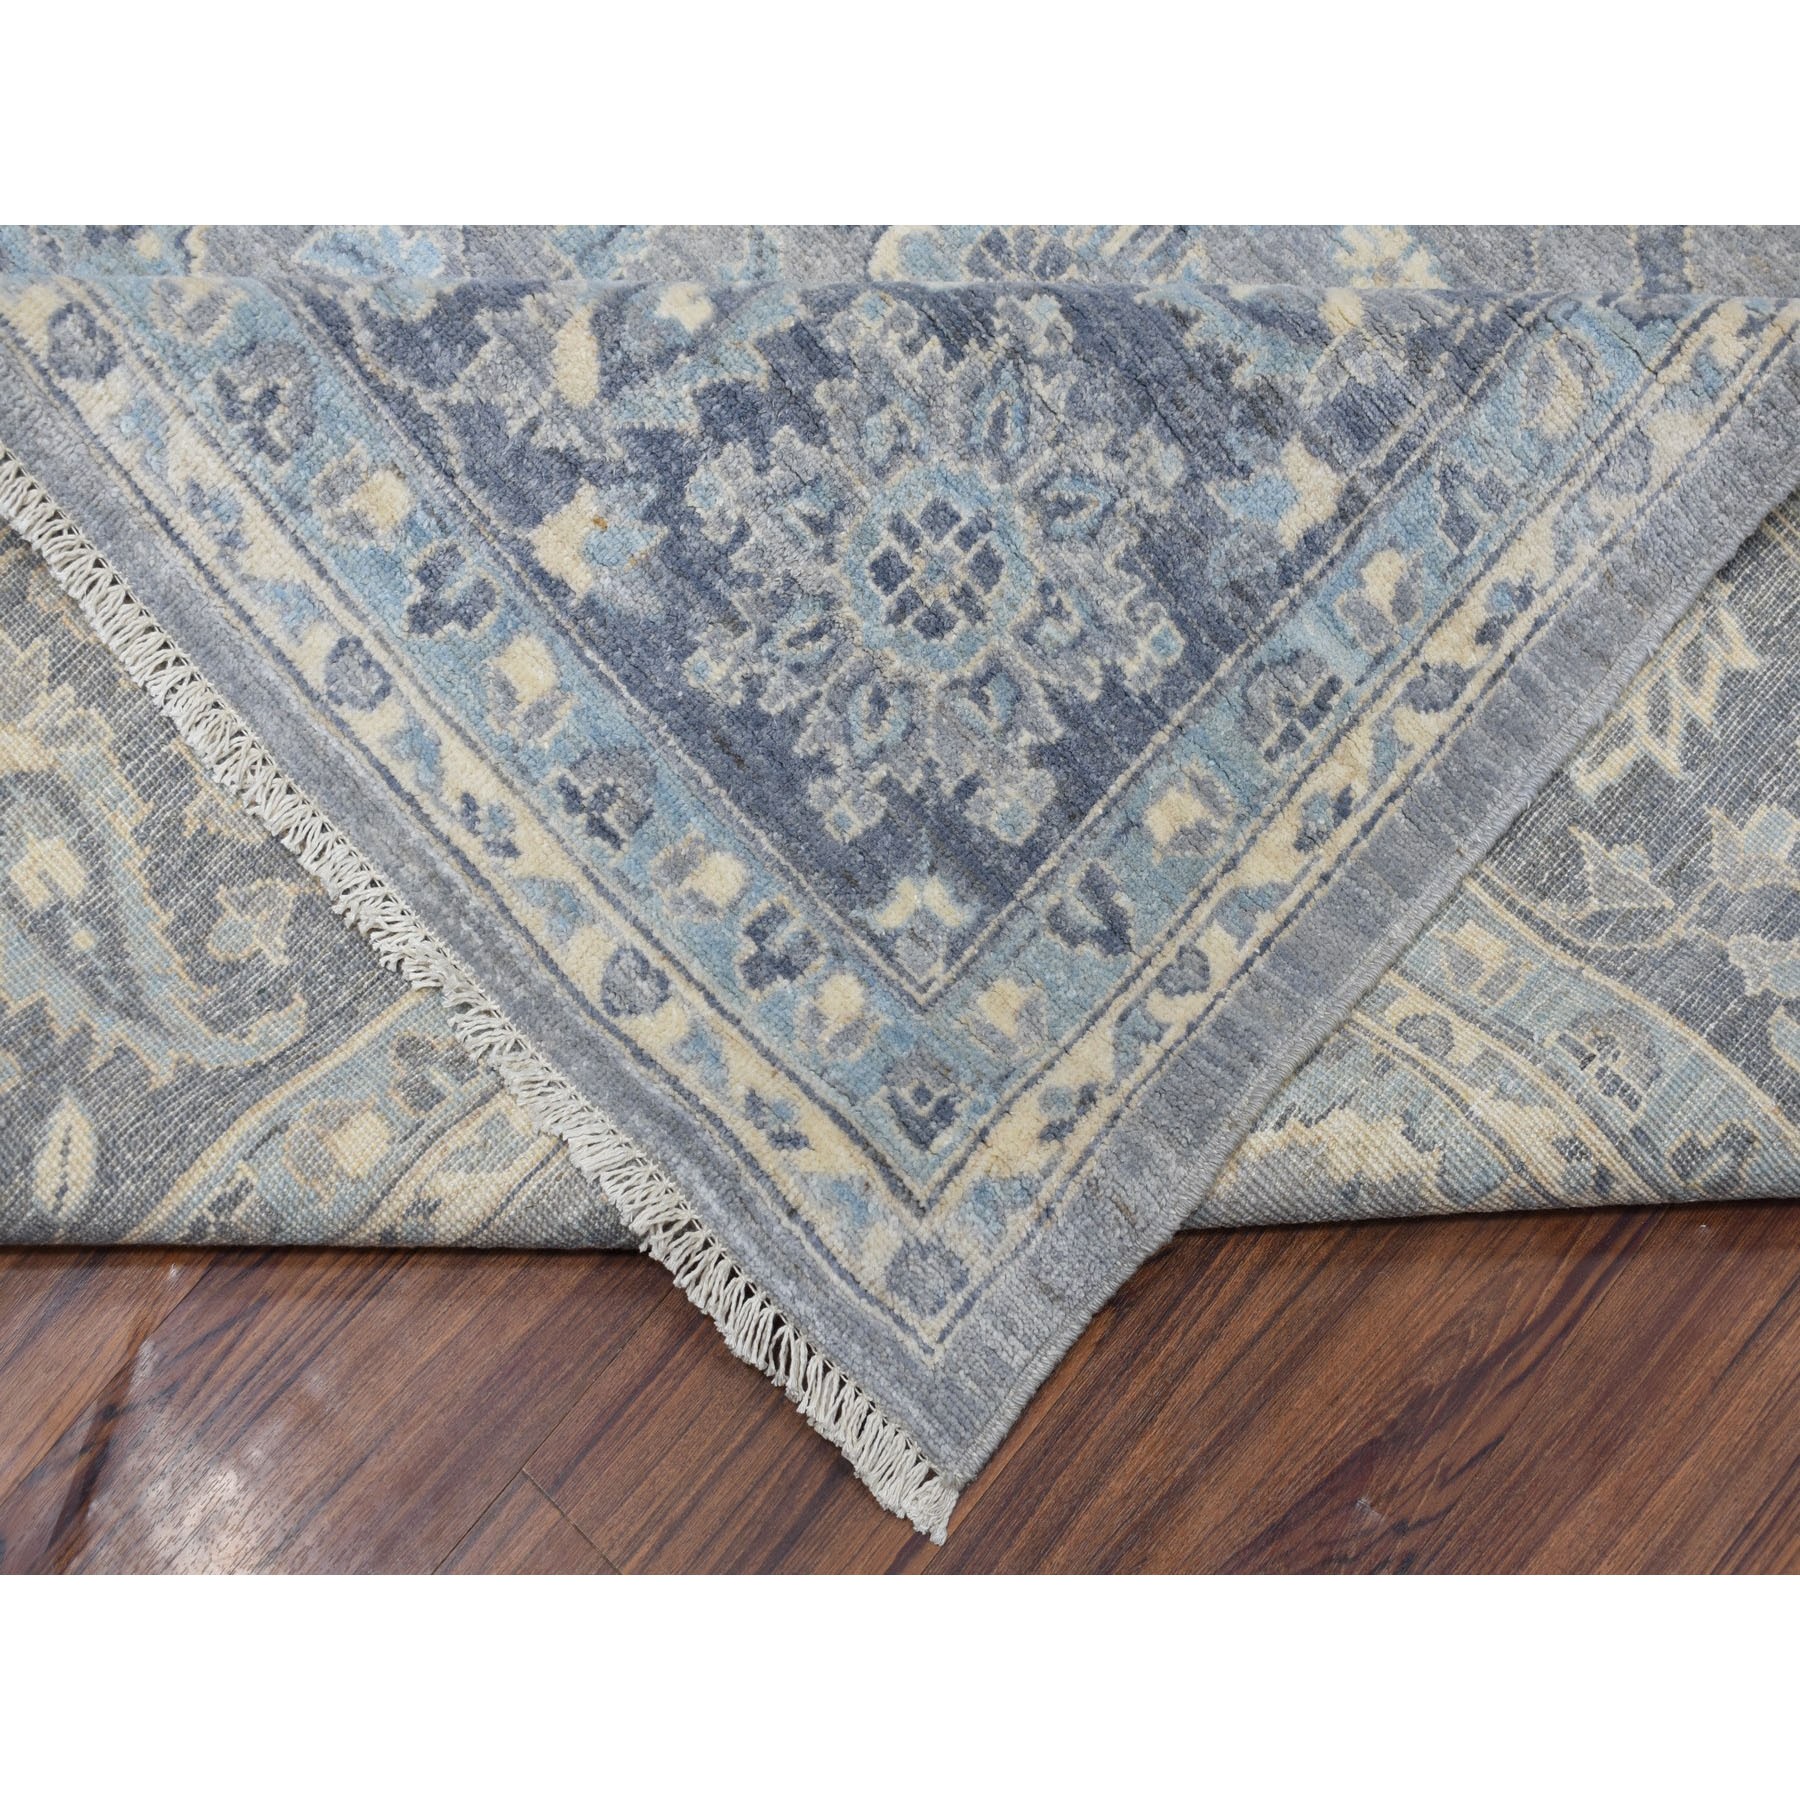 8-10 x12- Peshawar With Silver Wash Mahal Design Hand Knotted Oriental Rug 